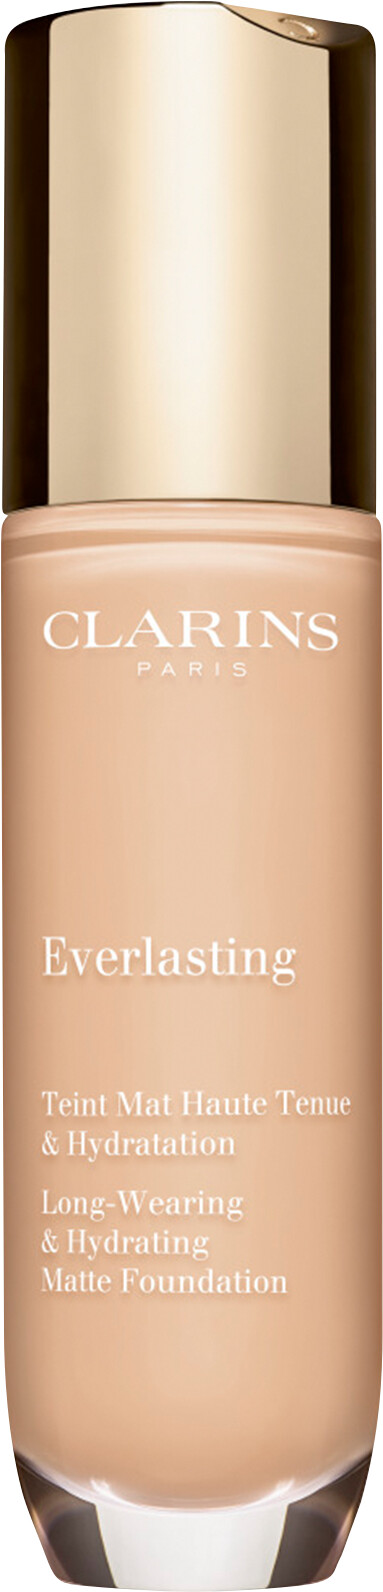 Clarins Everlasting Long-Wearing & Hydrating Matte Foundation 30ml 103N - Ivory